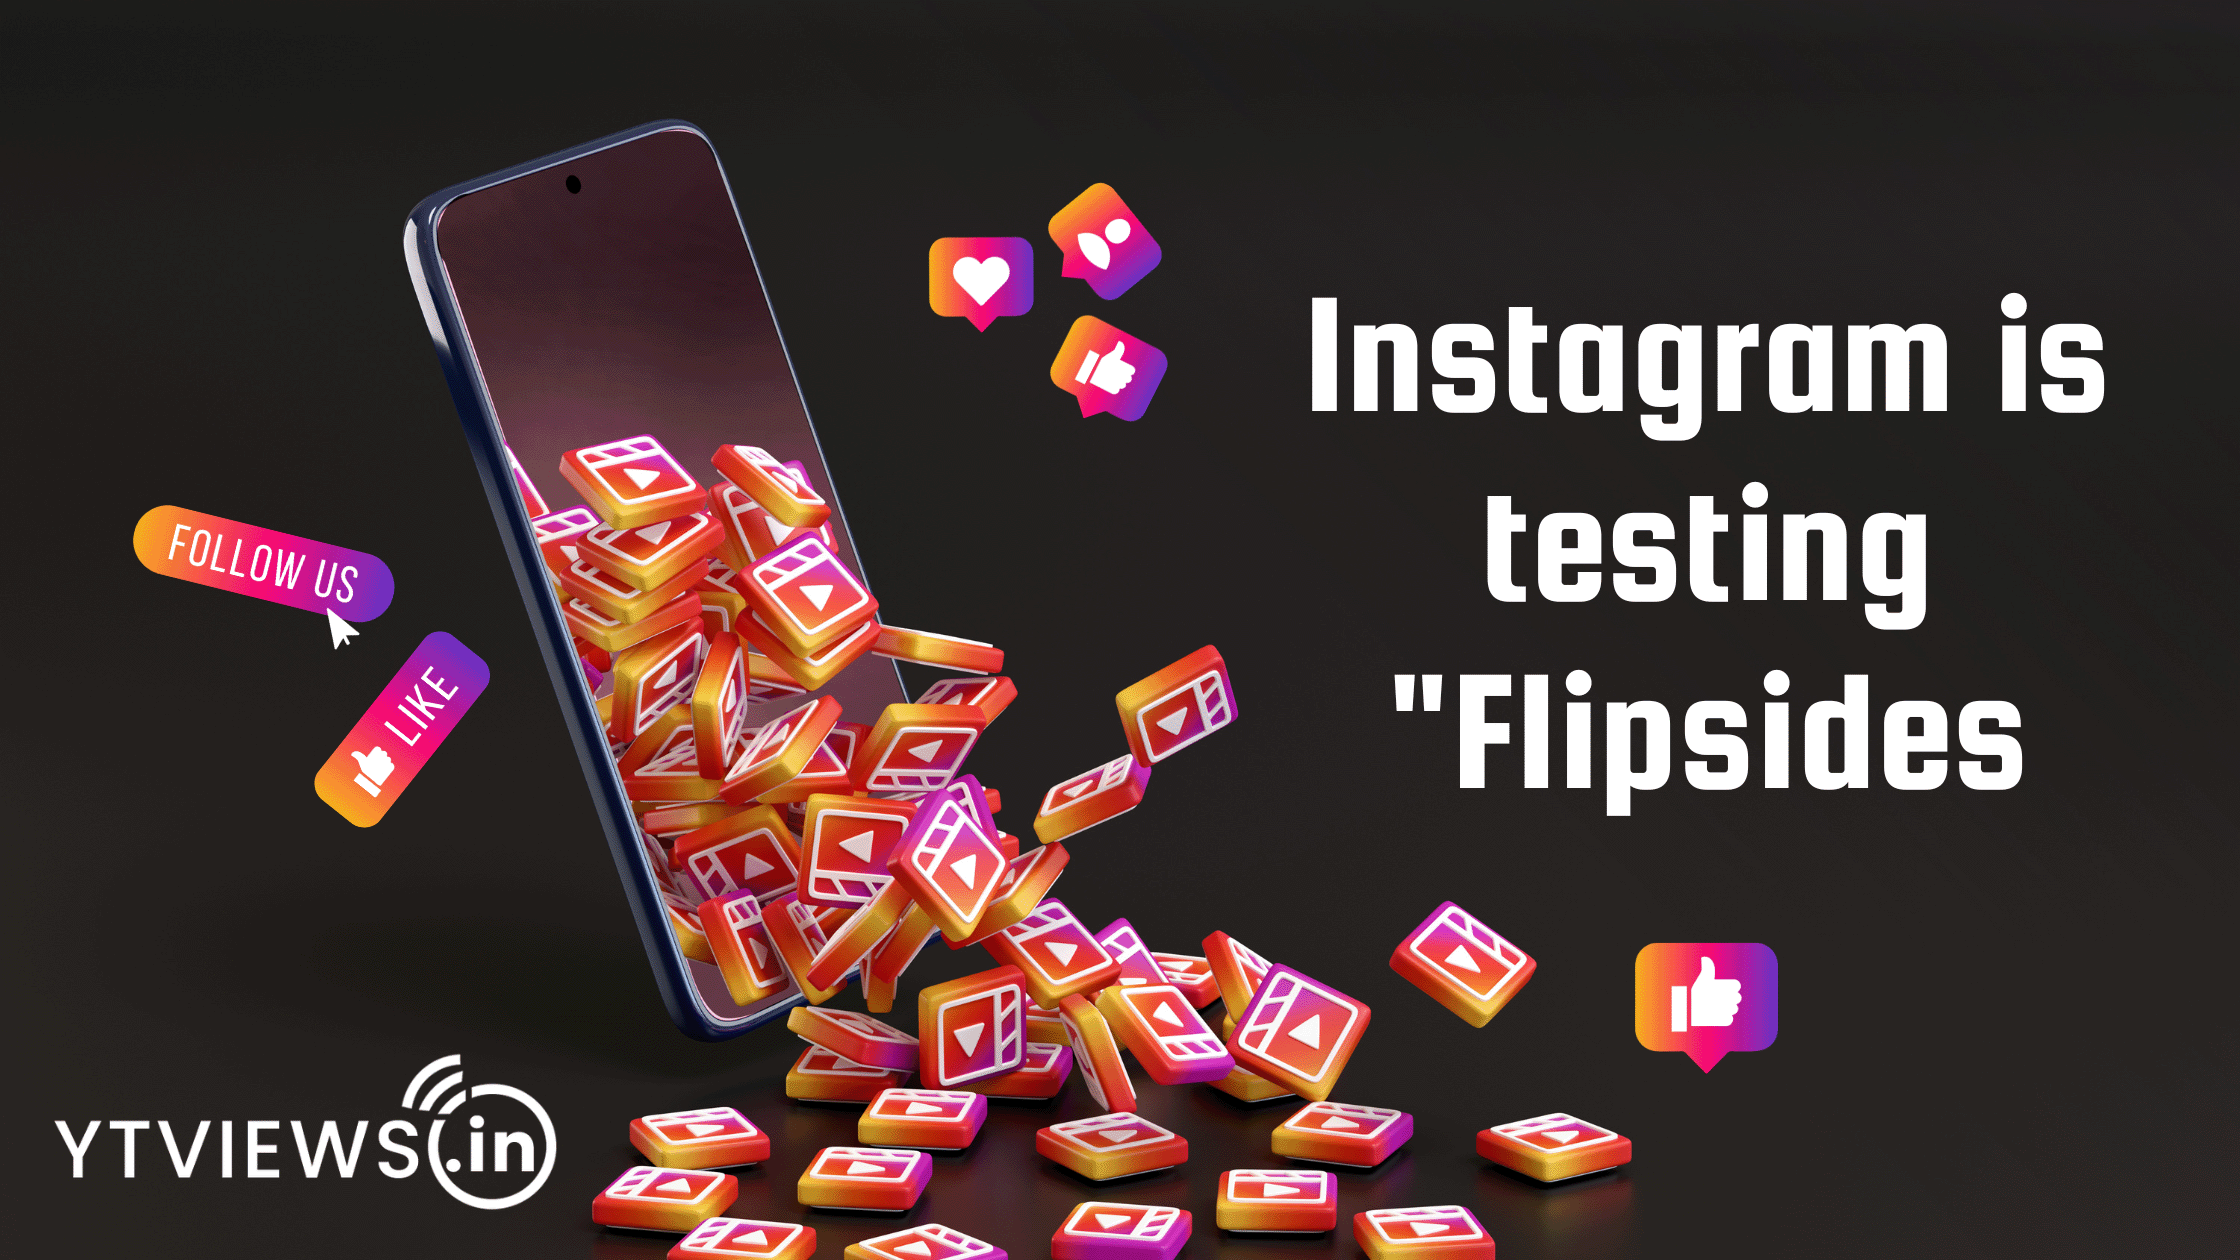 Instagram is testing “Flipsides”. What is it and how will it help?